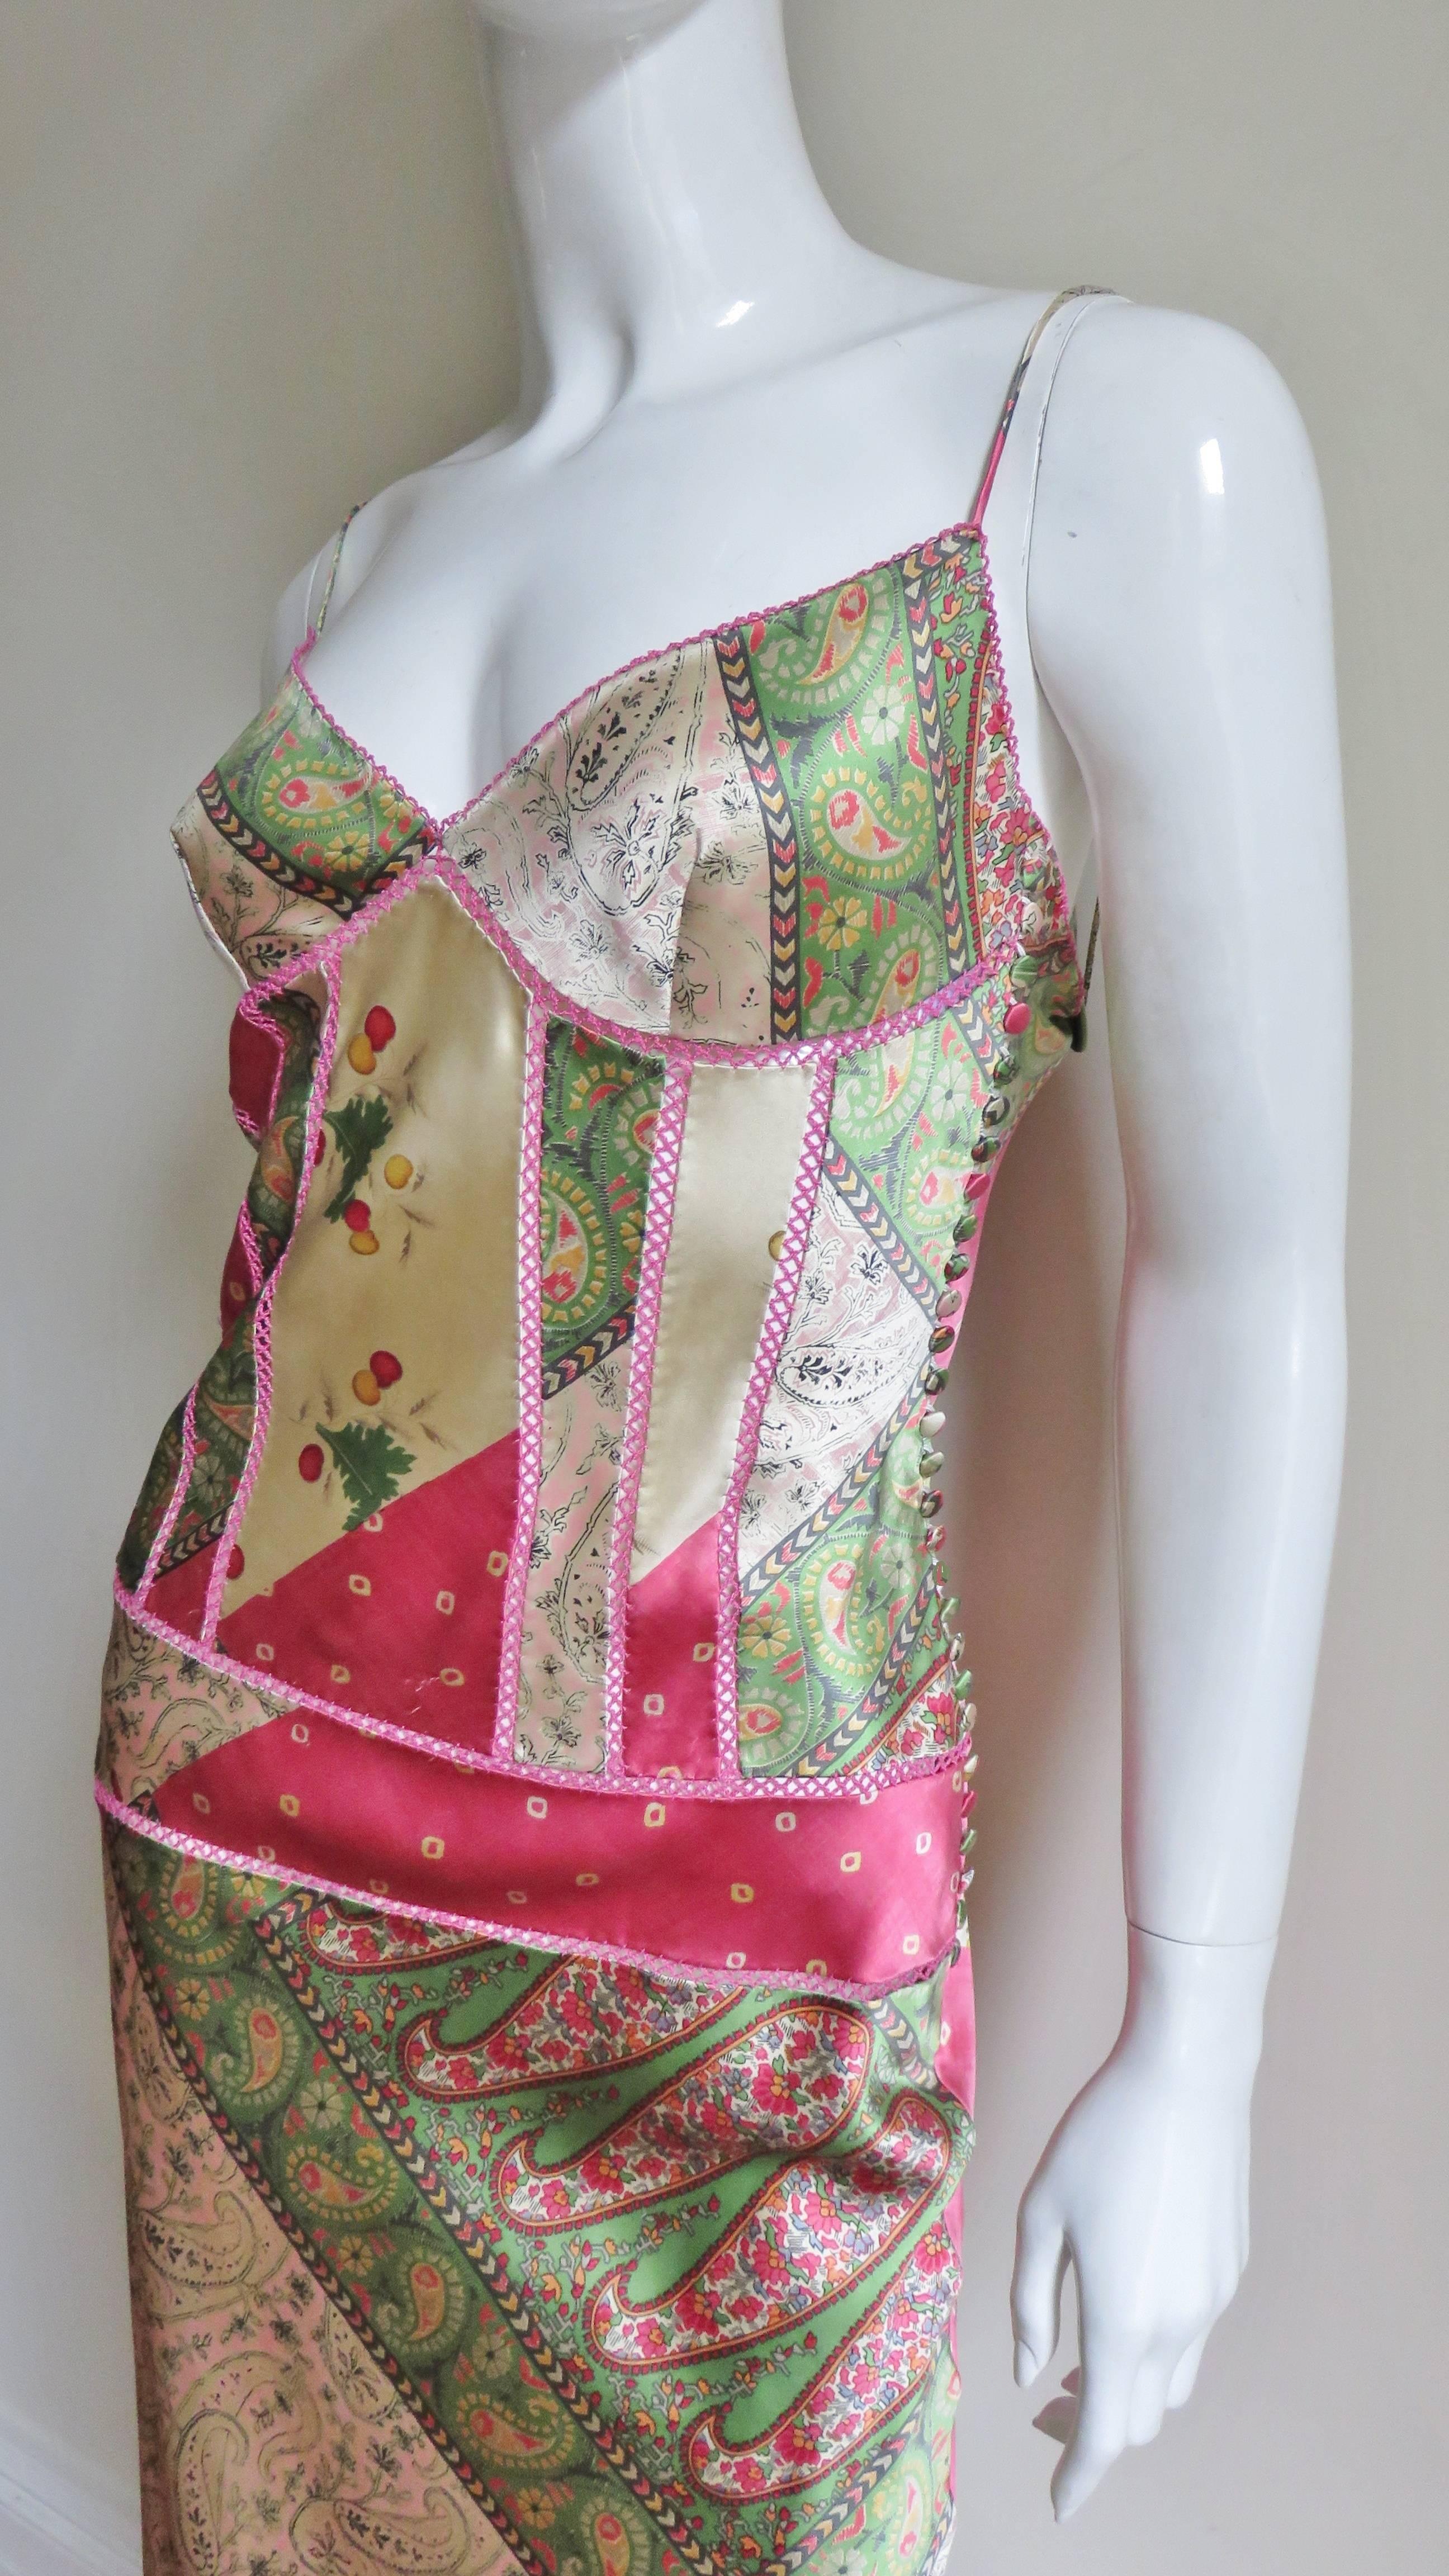 John Galliano for Christian Dior S/S 2004 Mixed Print Silk Slip Dress In Excellent Condition For Sale In Water Mill, NY